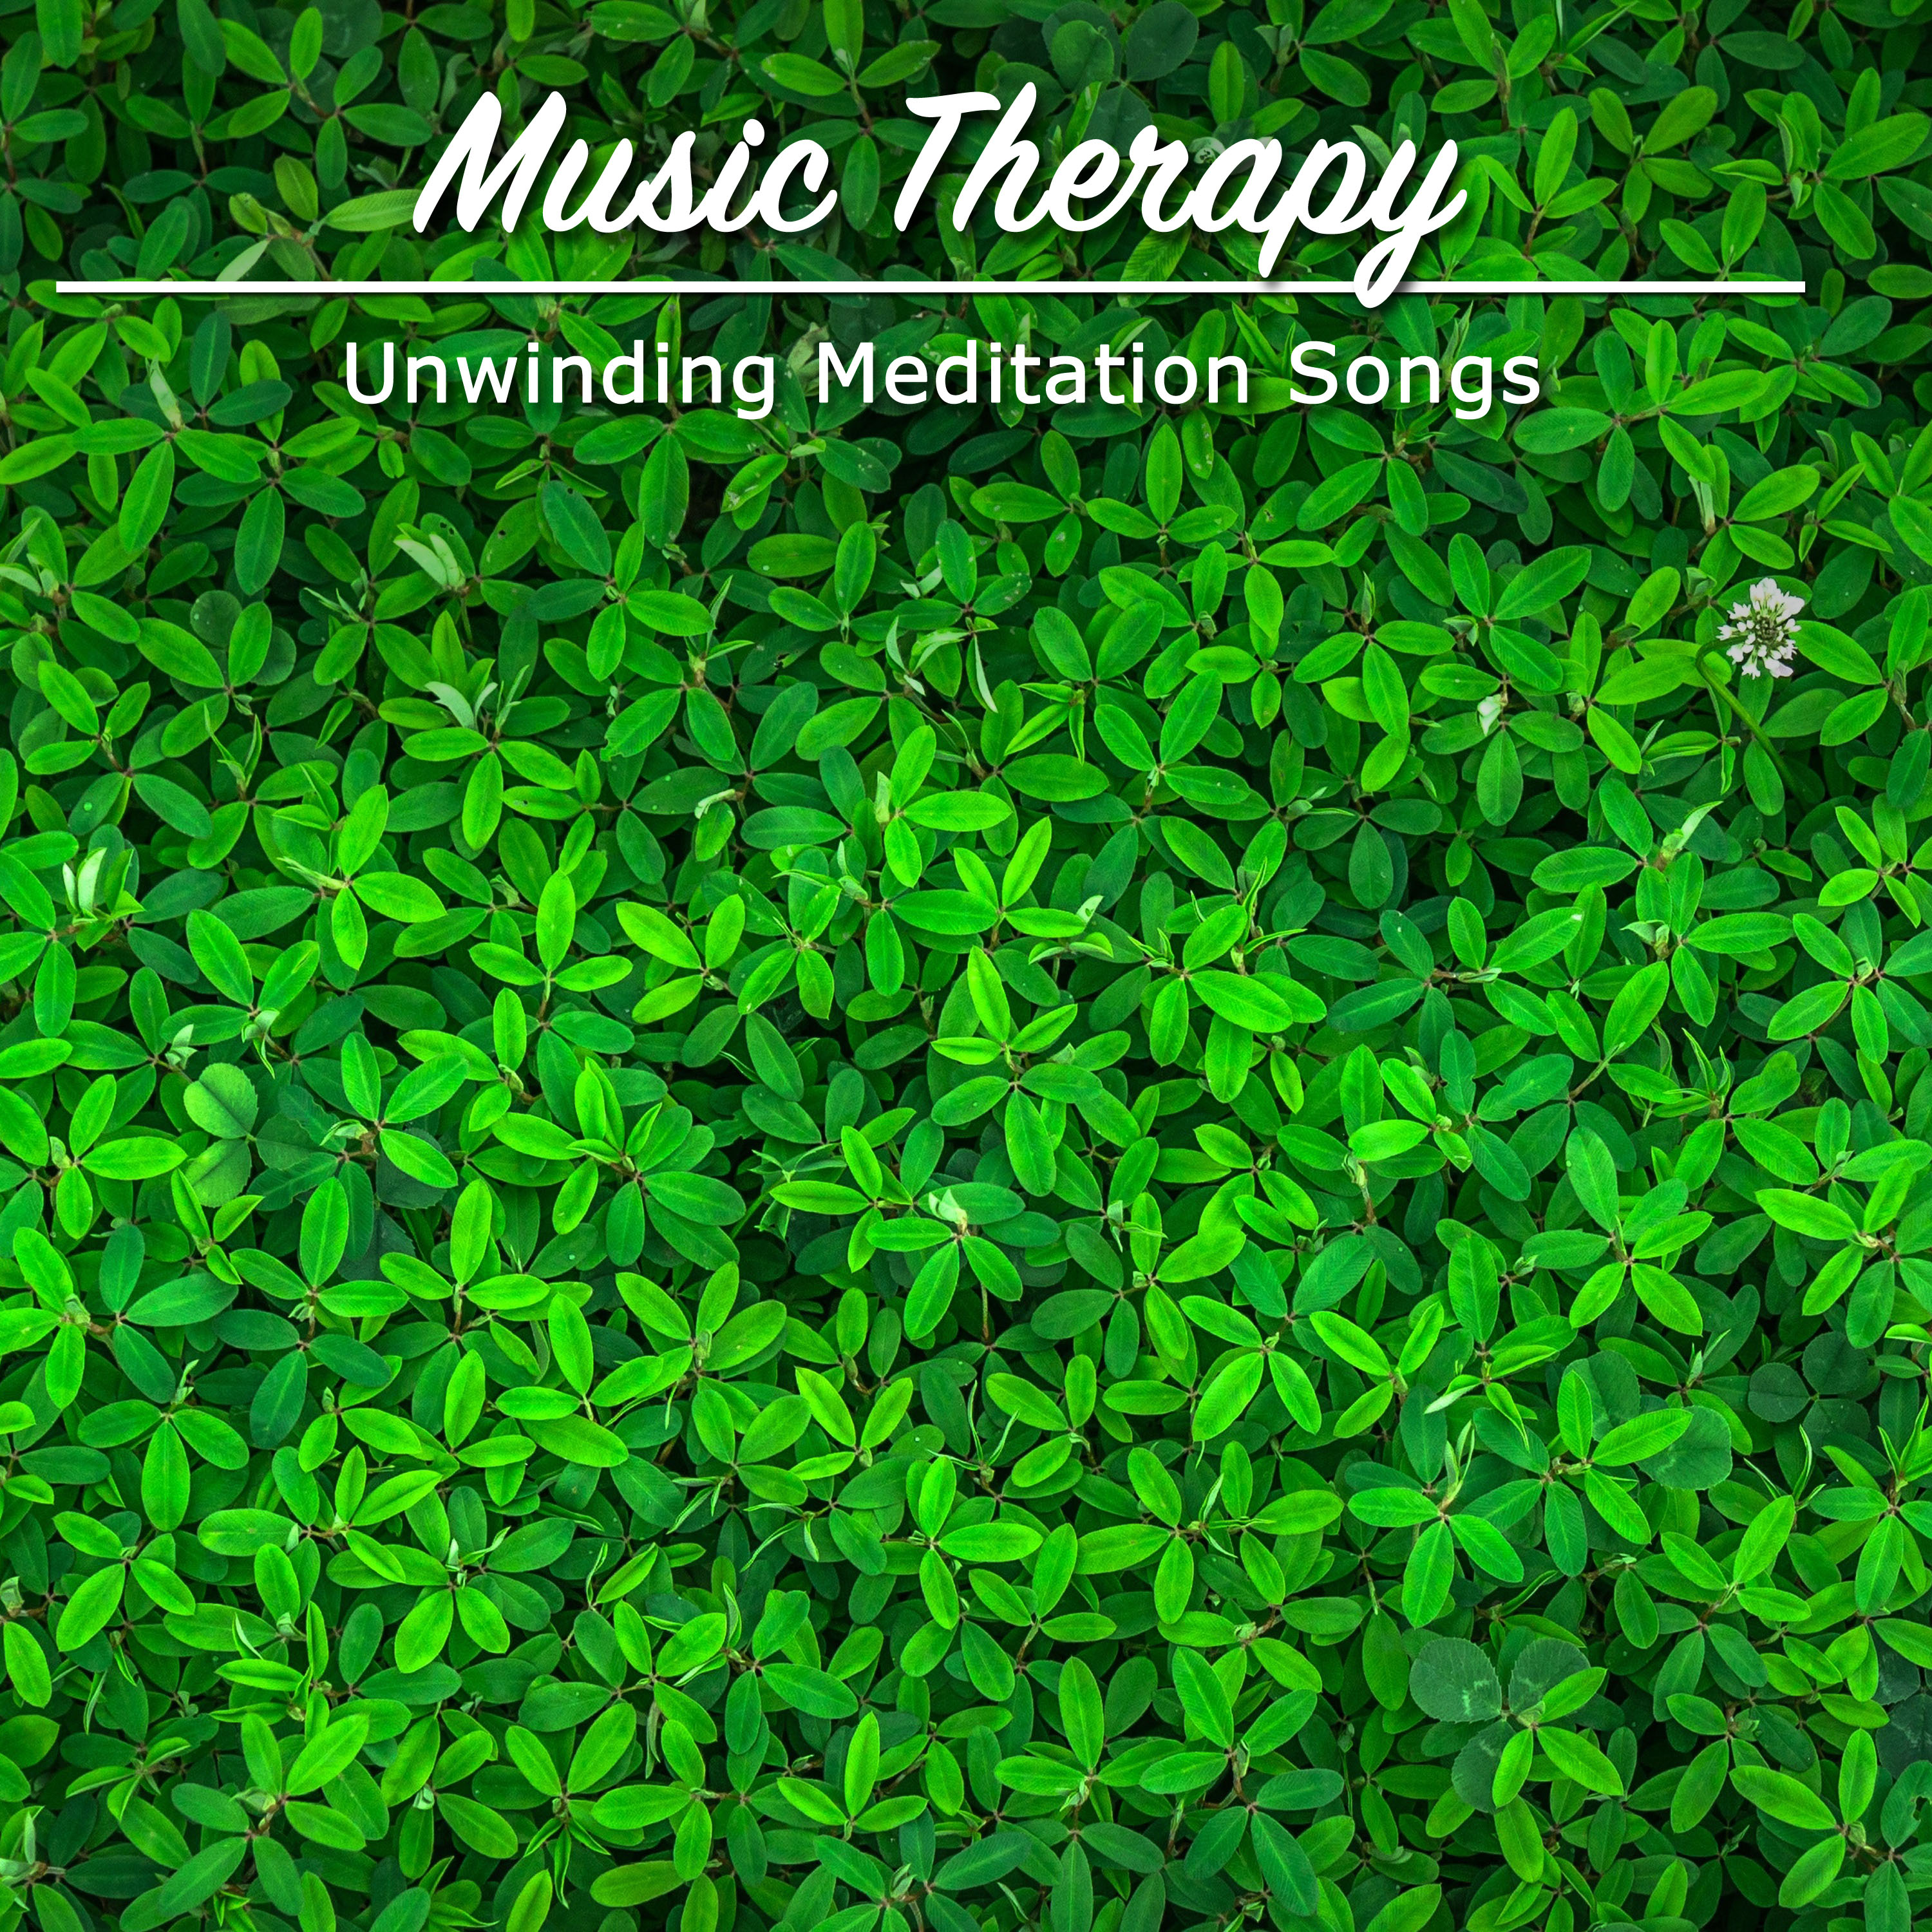 13 Unwinding Meditation Songs: Music Therapy